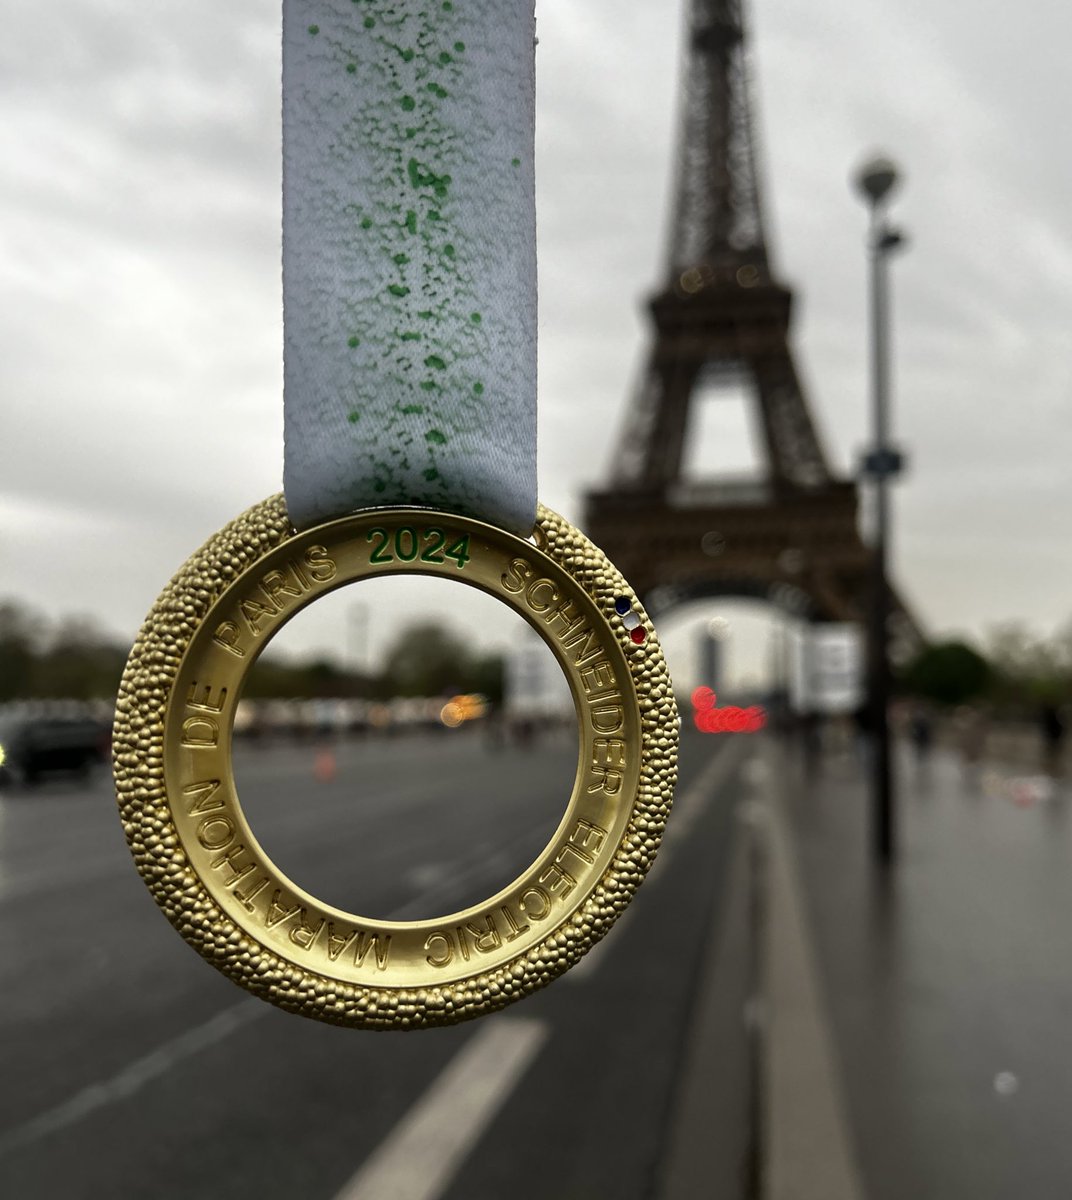 A humbling experience, second to none. This journey has issued many first for me that will forever be etched in my memory. This is the beauty of travelling! 

Merci @parismarathon for a world class and biggest marathon. jusqu'à la prochaine fois.✨

#MedalMonday